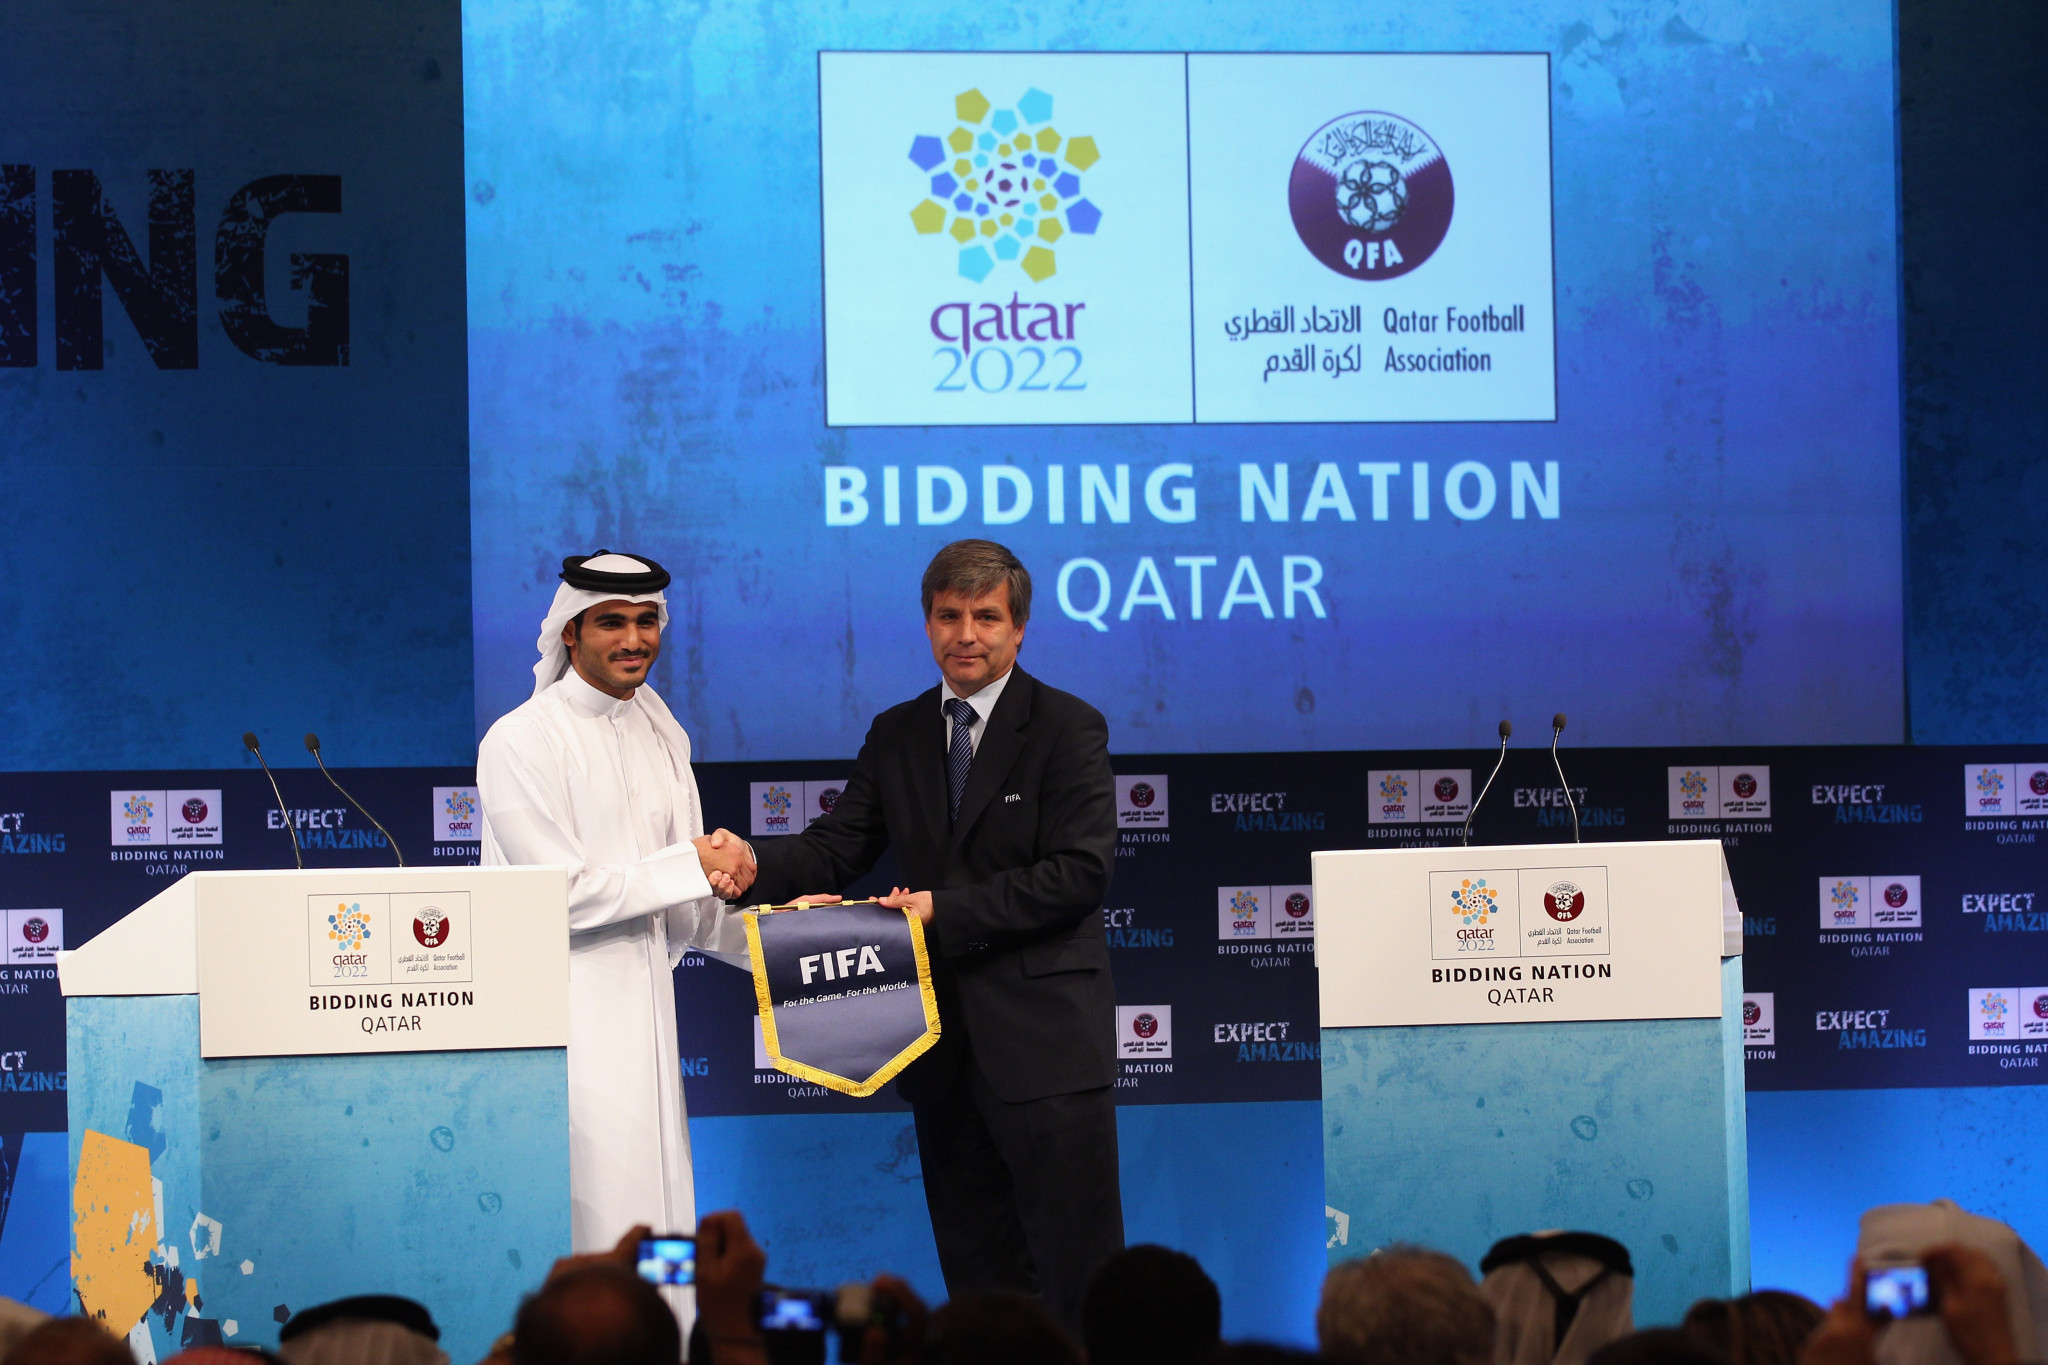 Harold Mayne-Nicholls, right, was the first FIFA official banned for his role in the disputed double award of the 2018 and 2022 World Cups, but had warned Qatar was the only 